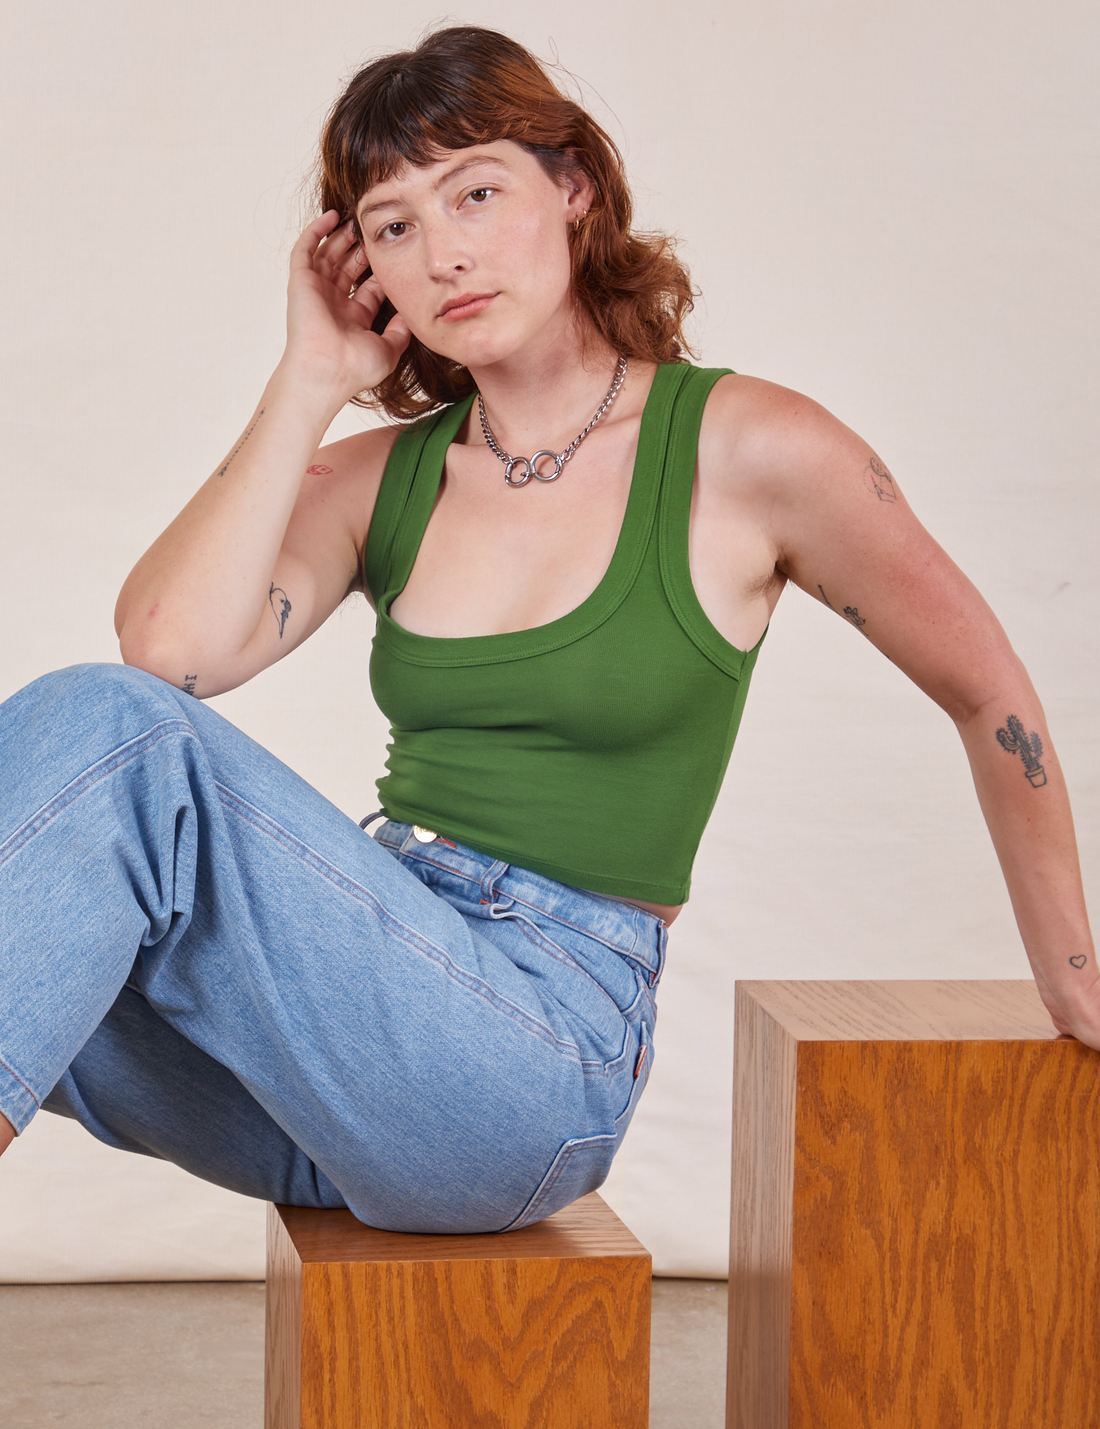 Alex is wearing Cropped Tank Top in Lawn Green and sitting on a wooden box